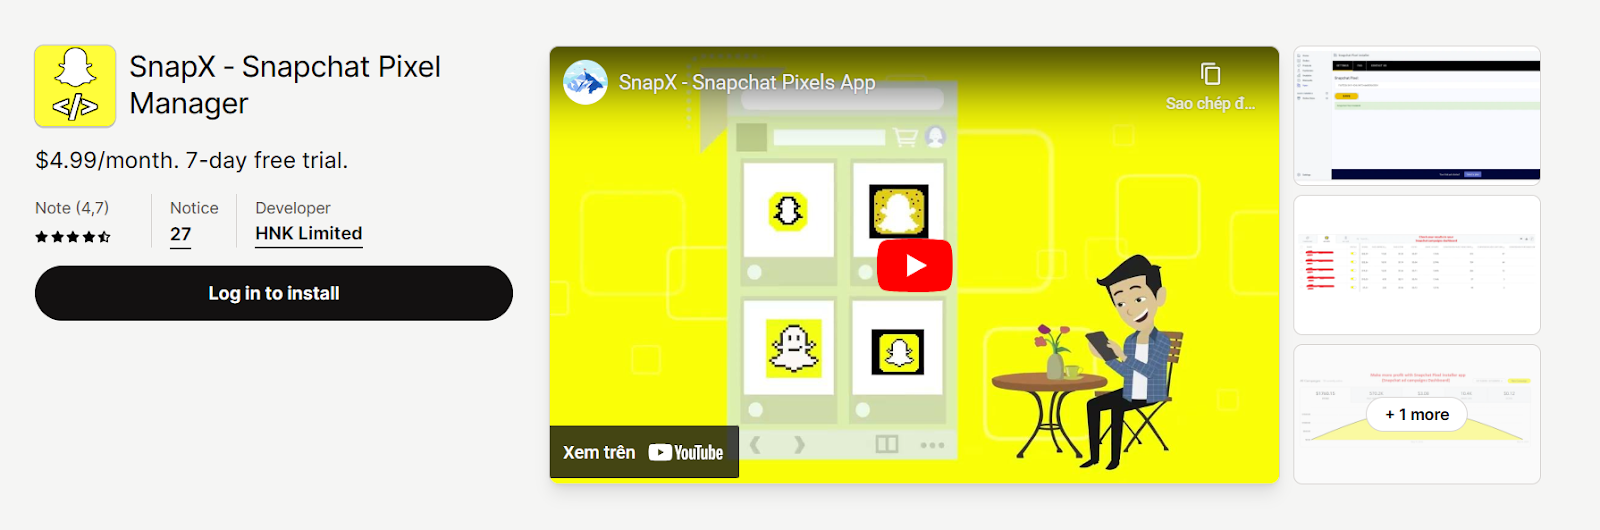 SnapX ‑ Snapchat Pixel Manager